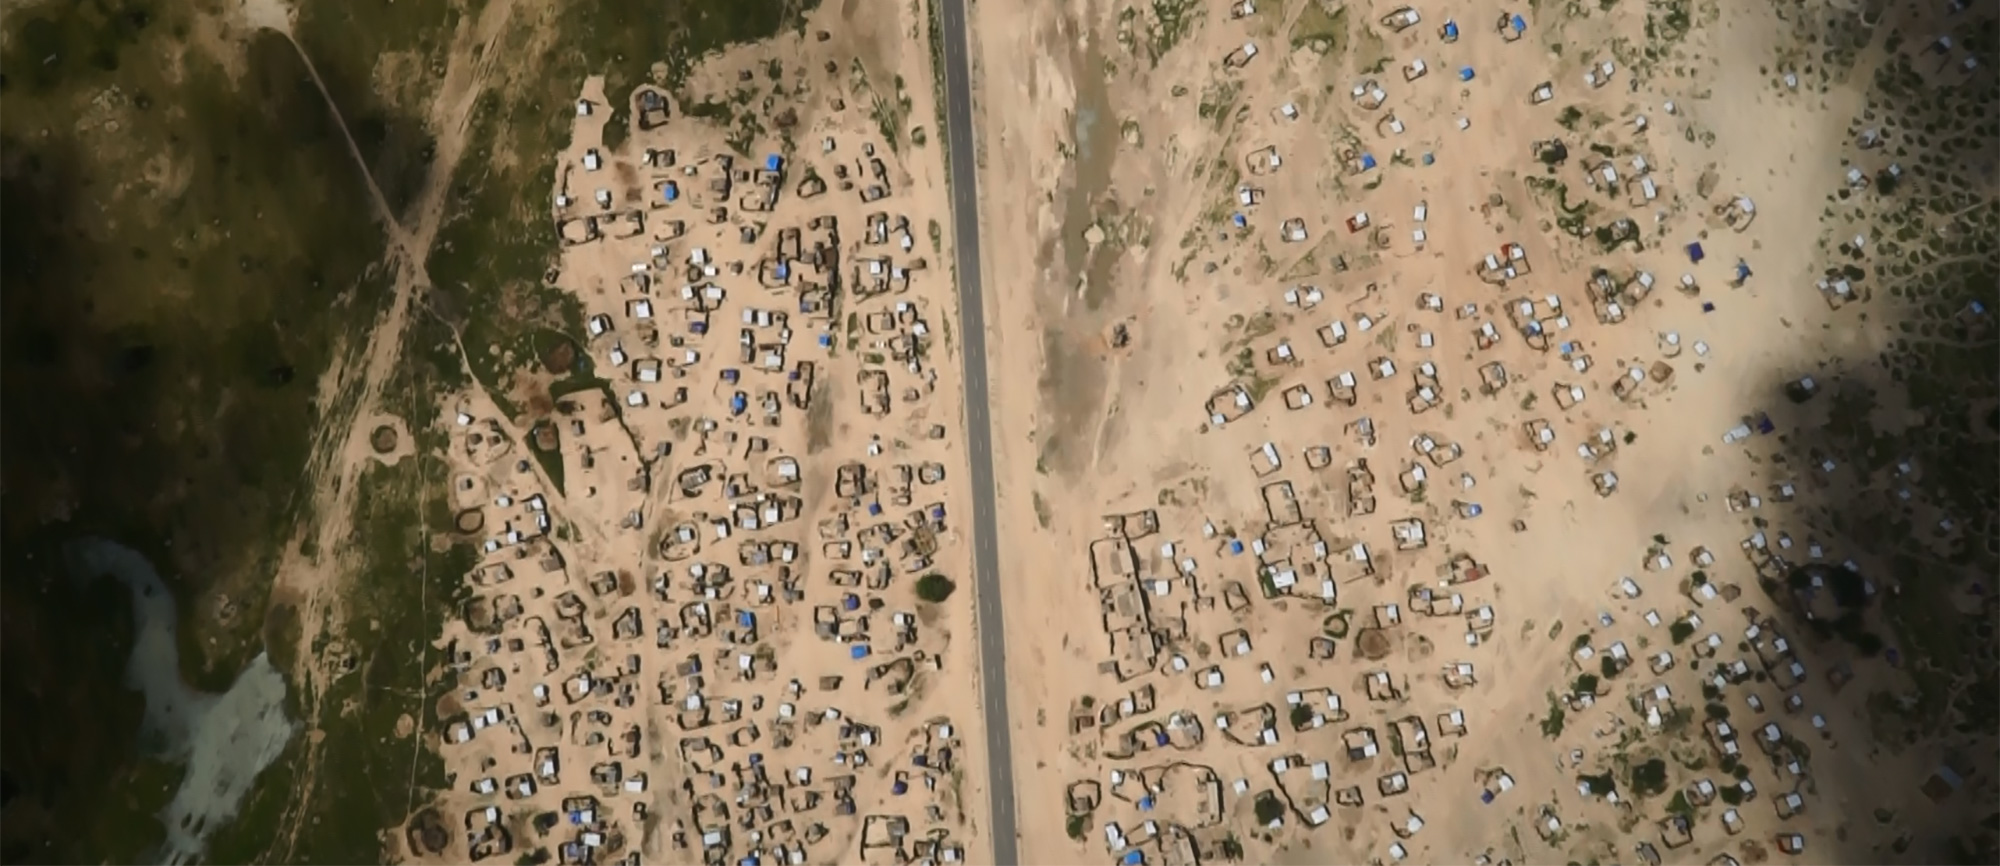 Photo of drone mapping over Diffa, Niger.